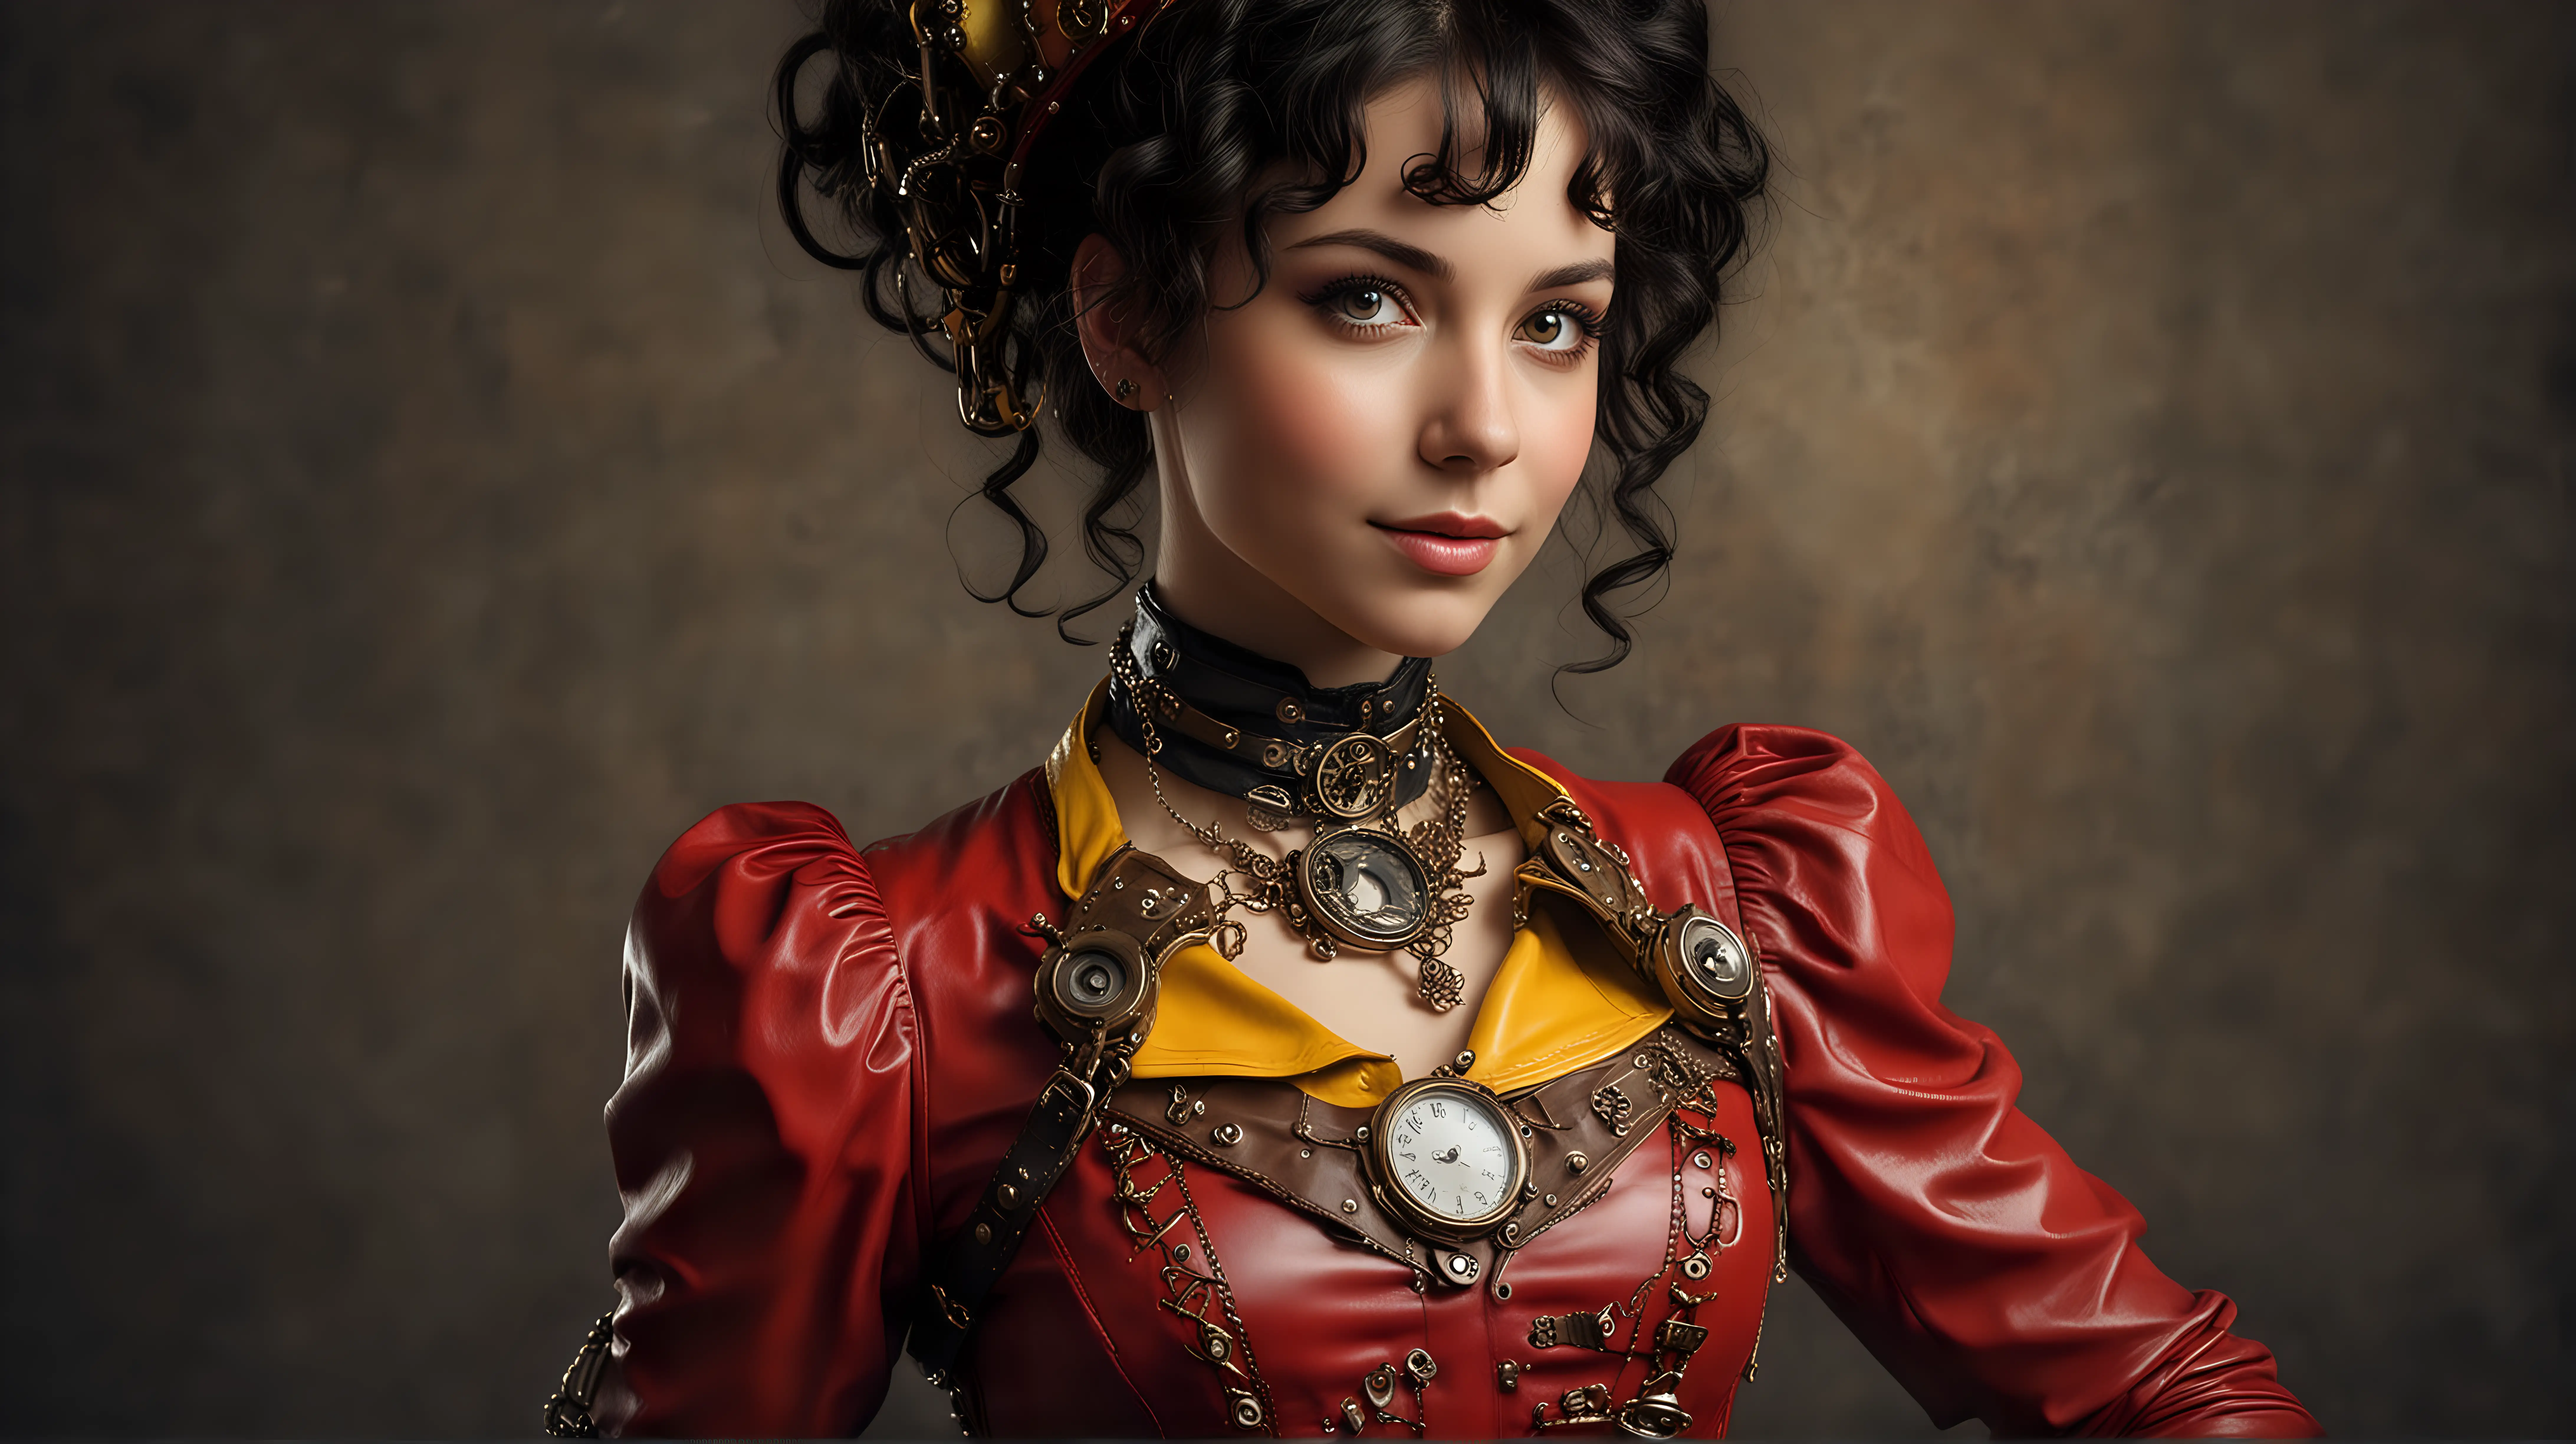 the realistic  portrait of a young steampunk woman in a red and yellow leather dress, delicate steampunk jewelry, steampunk gogles, black curly hair, mysterious smile, full silhouette visible